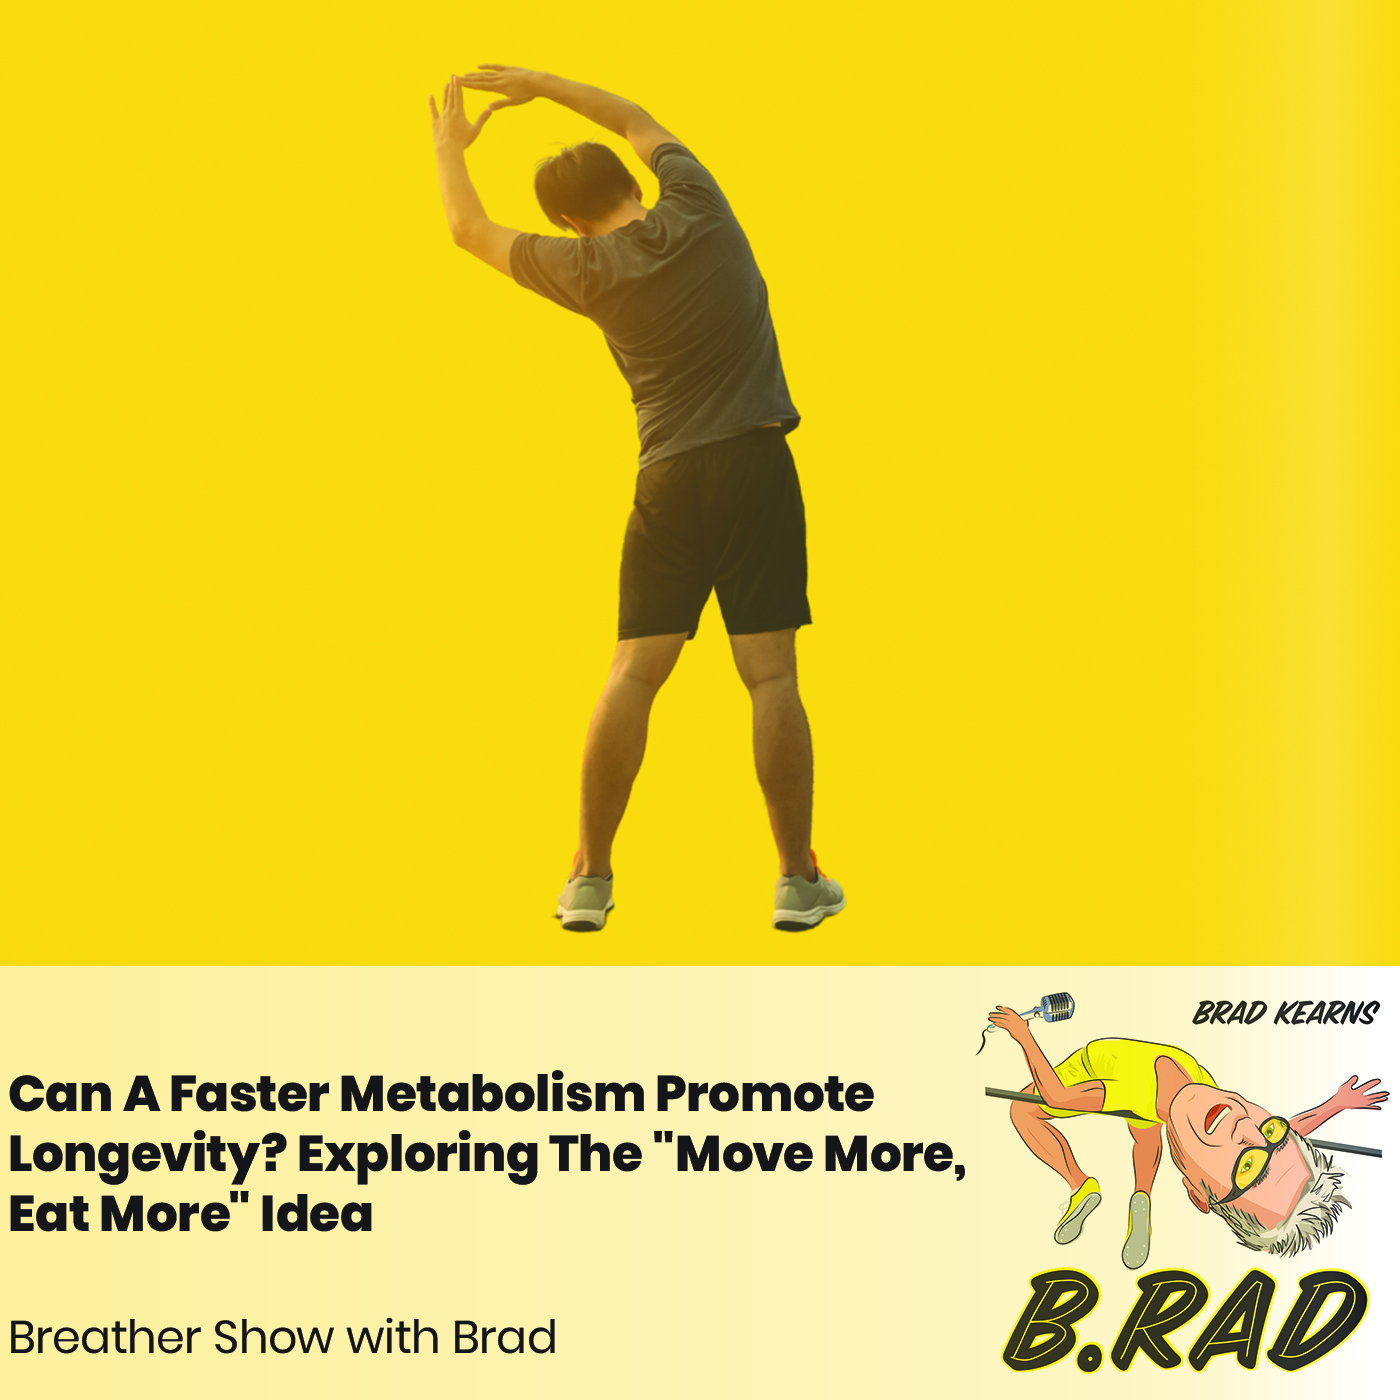 Can A Faster Metabolism Promote Longevity? Exploring The "Move More, Eat More" Idea (Breather Episode with Brad)